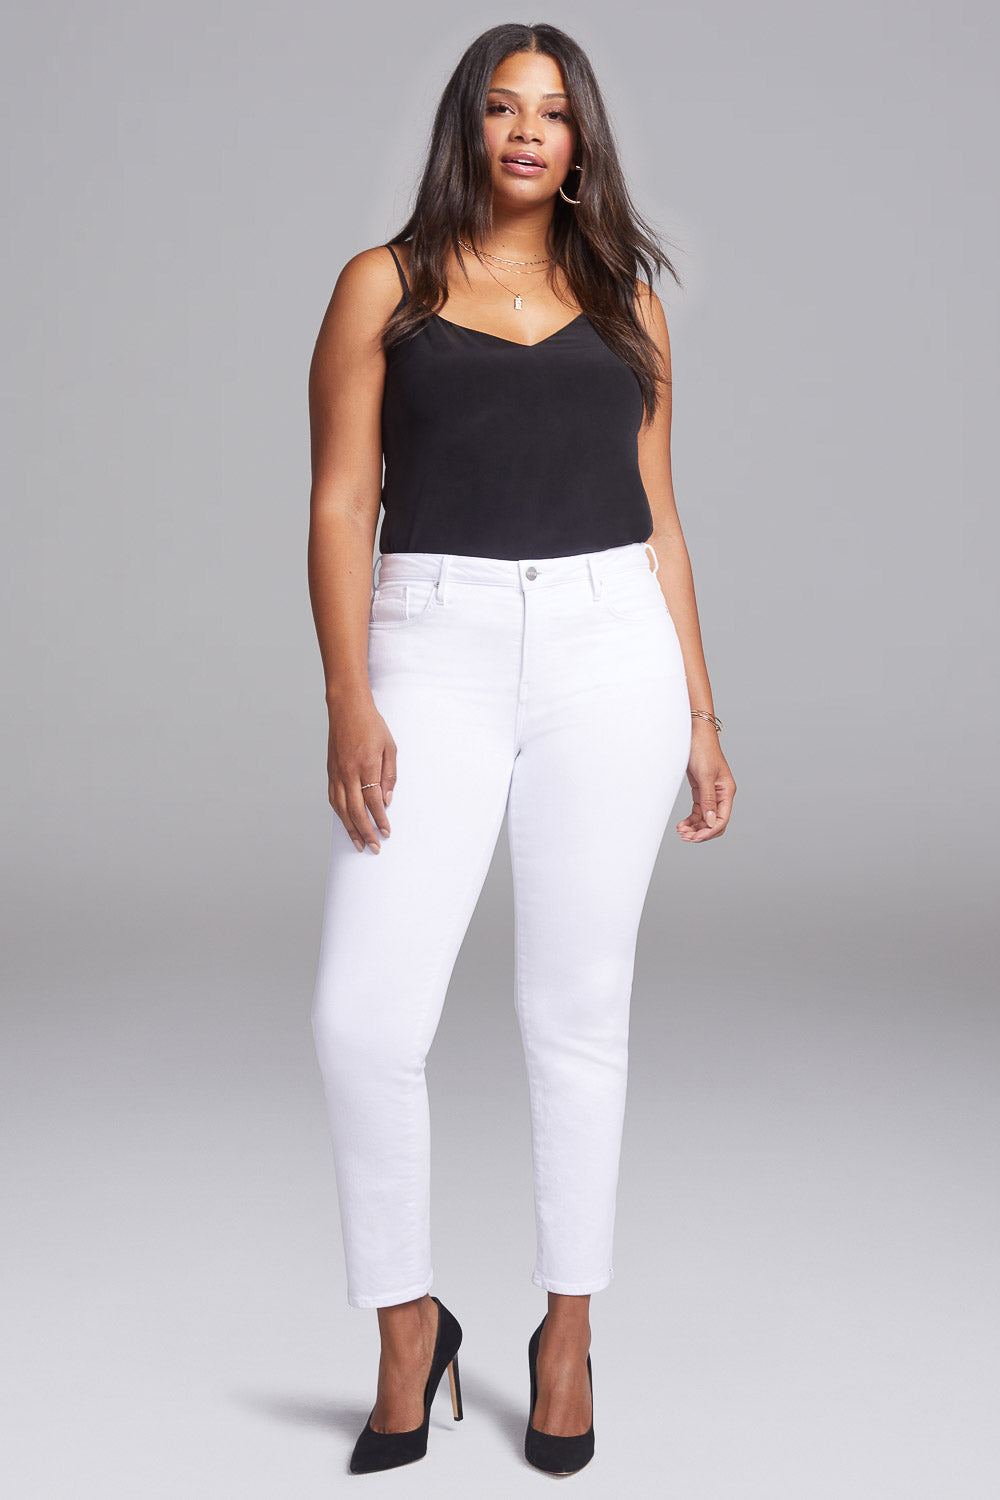 Slim Straight Ankle Jeans In Short Inseam - Optic White